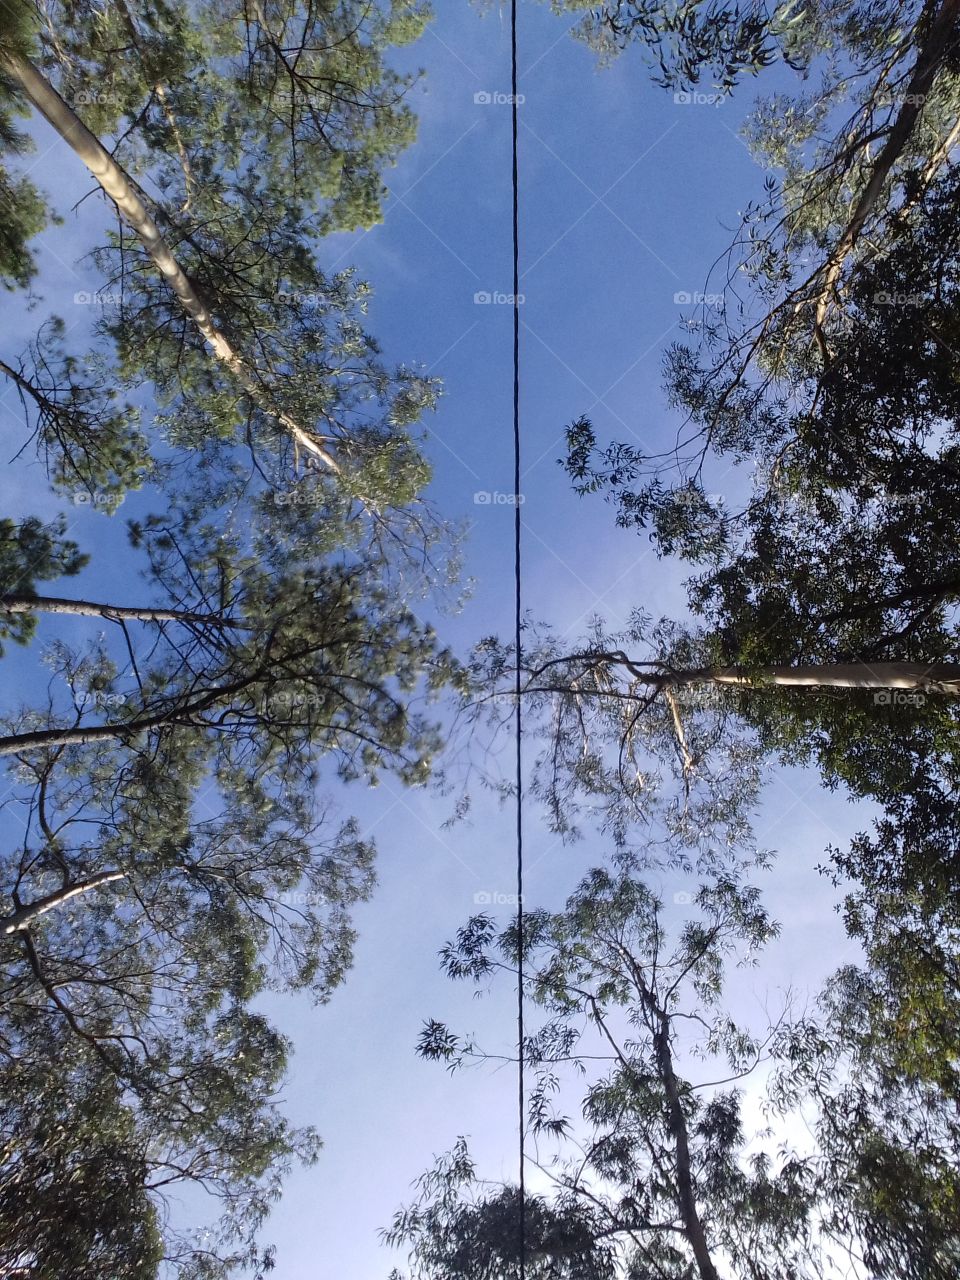 Picture taken with the front camera of the sky and trees